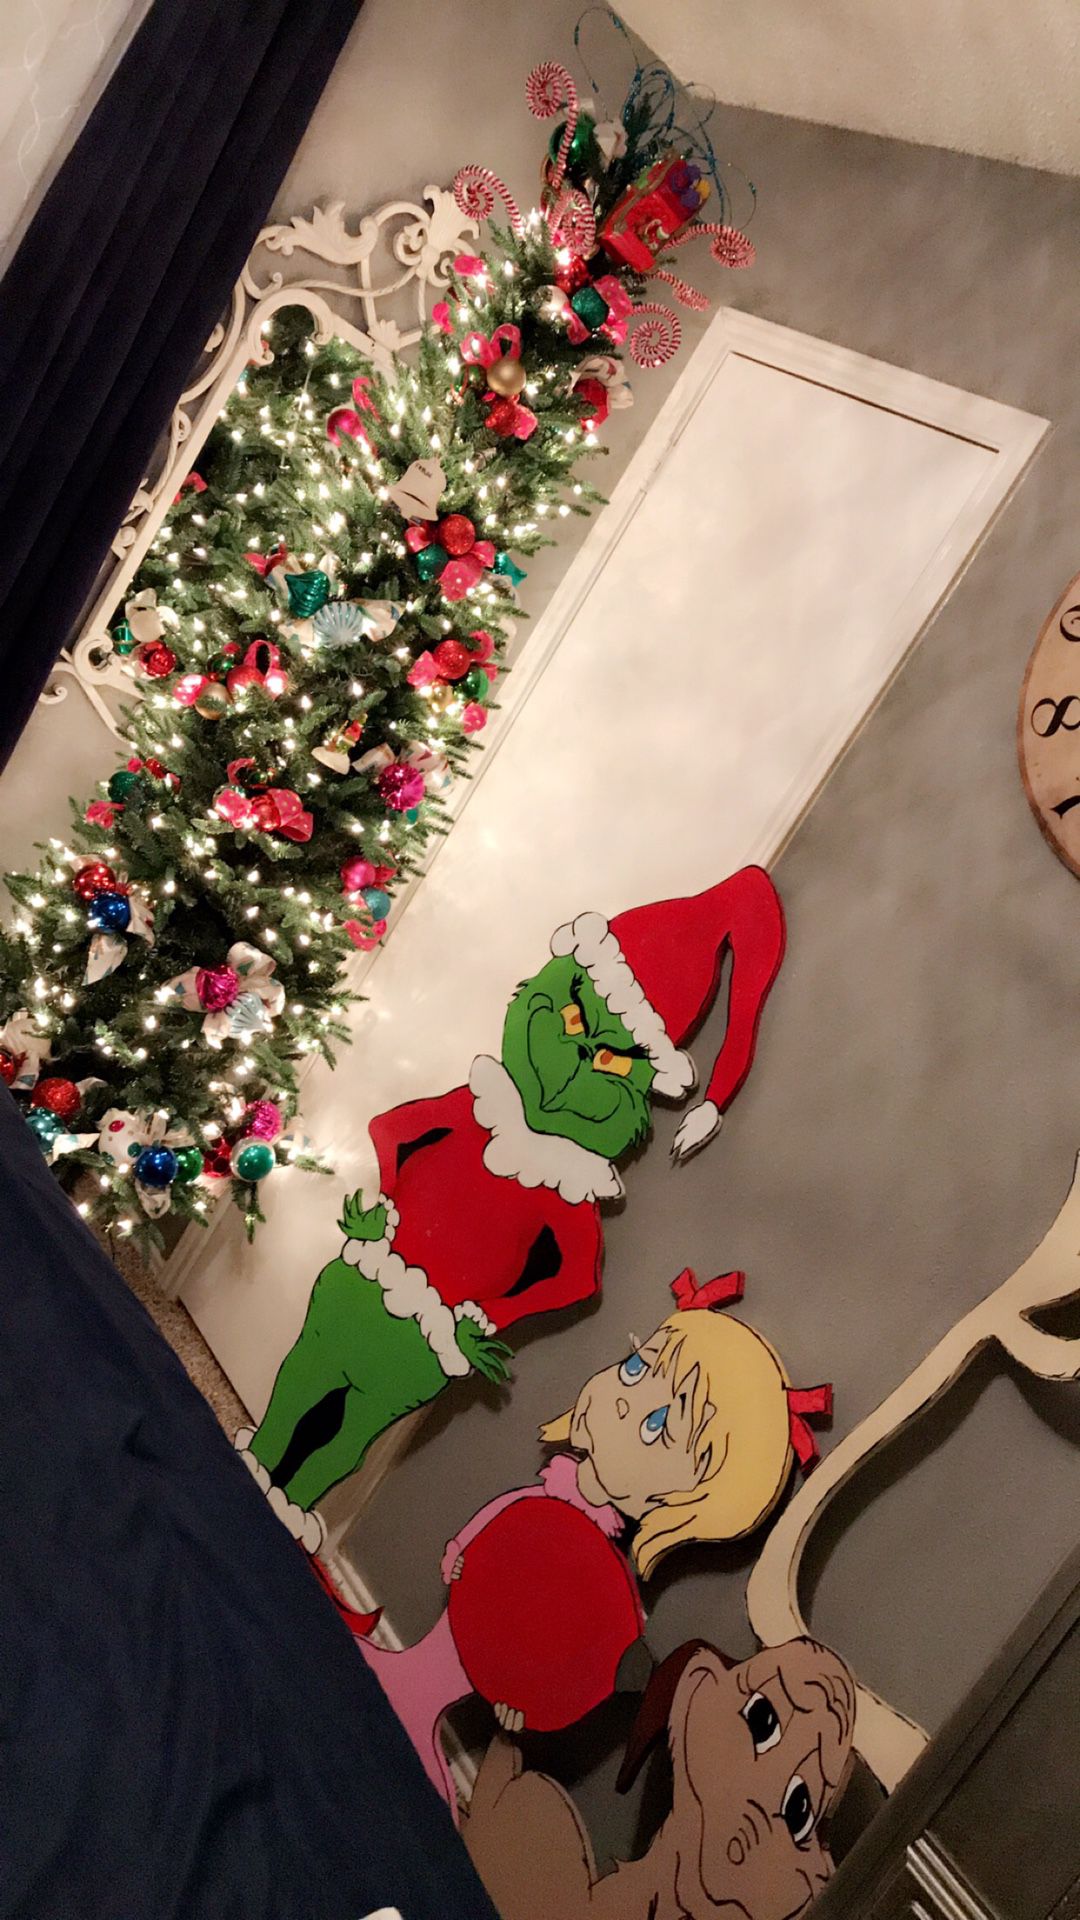 The Grinch Stole Christmas Tree Decor & Standees